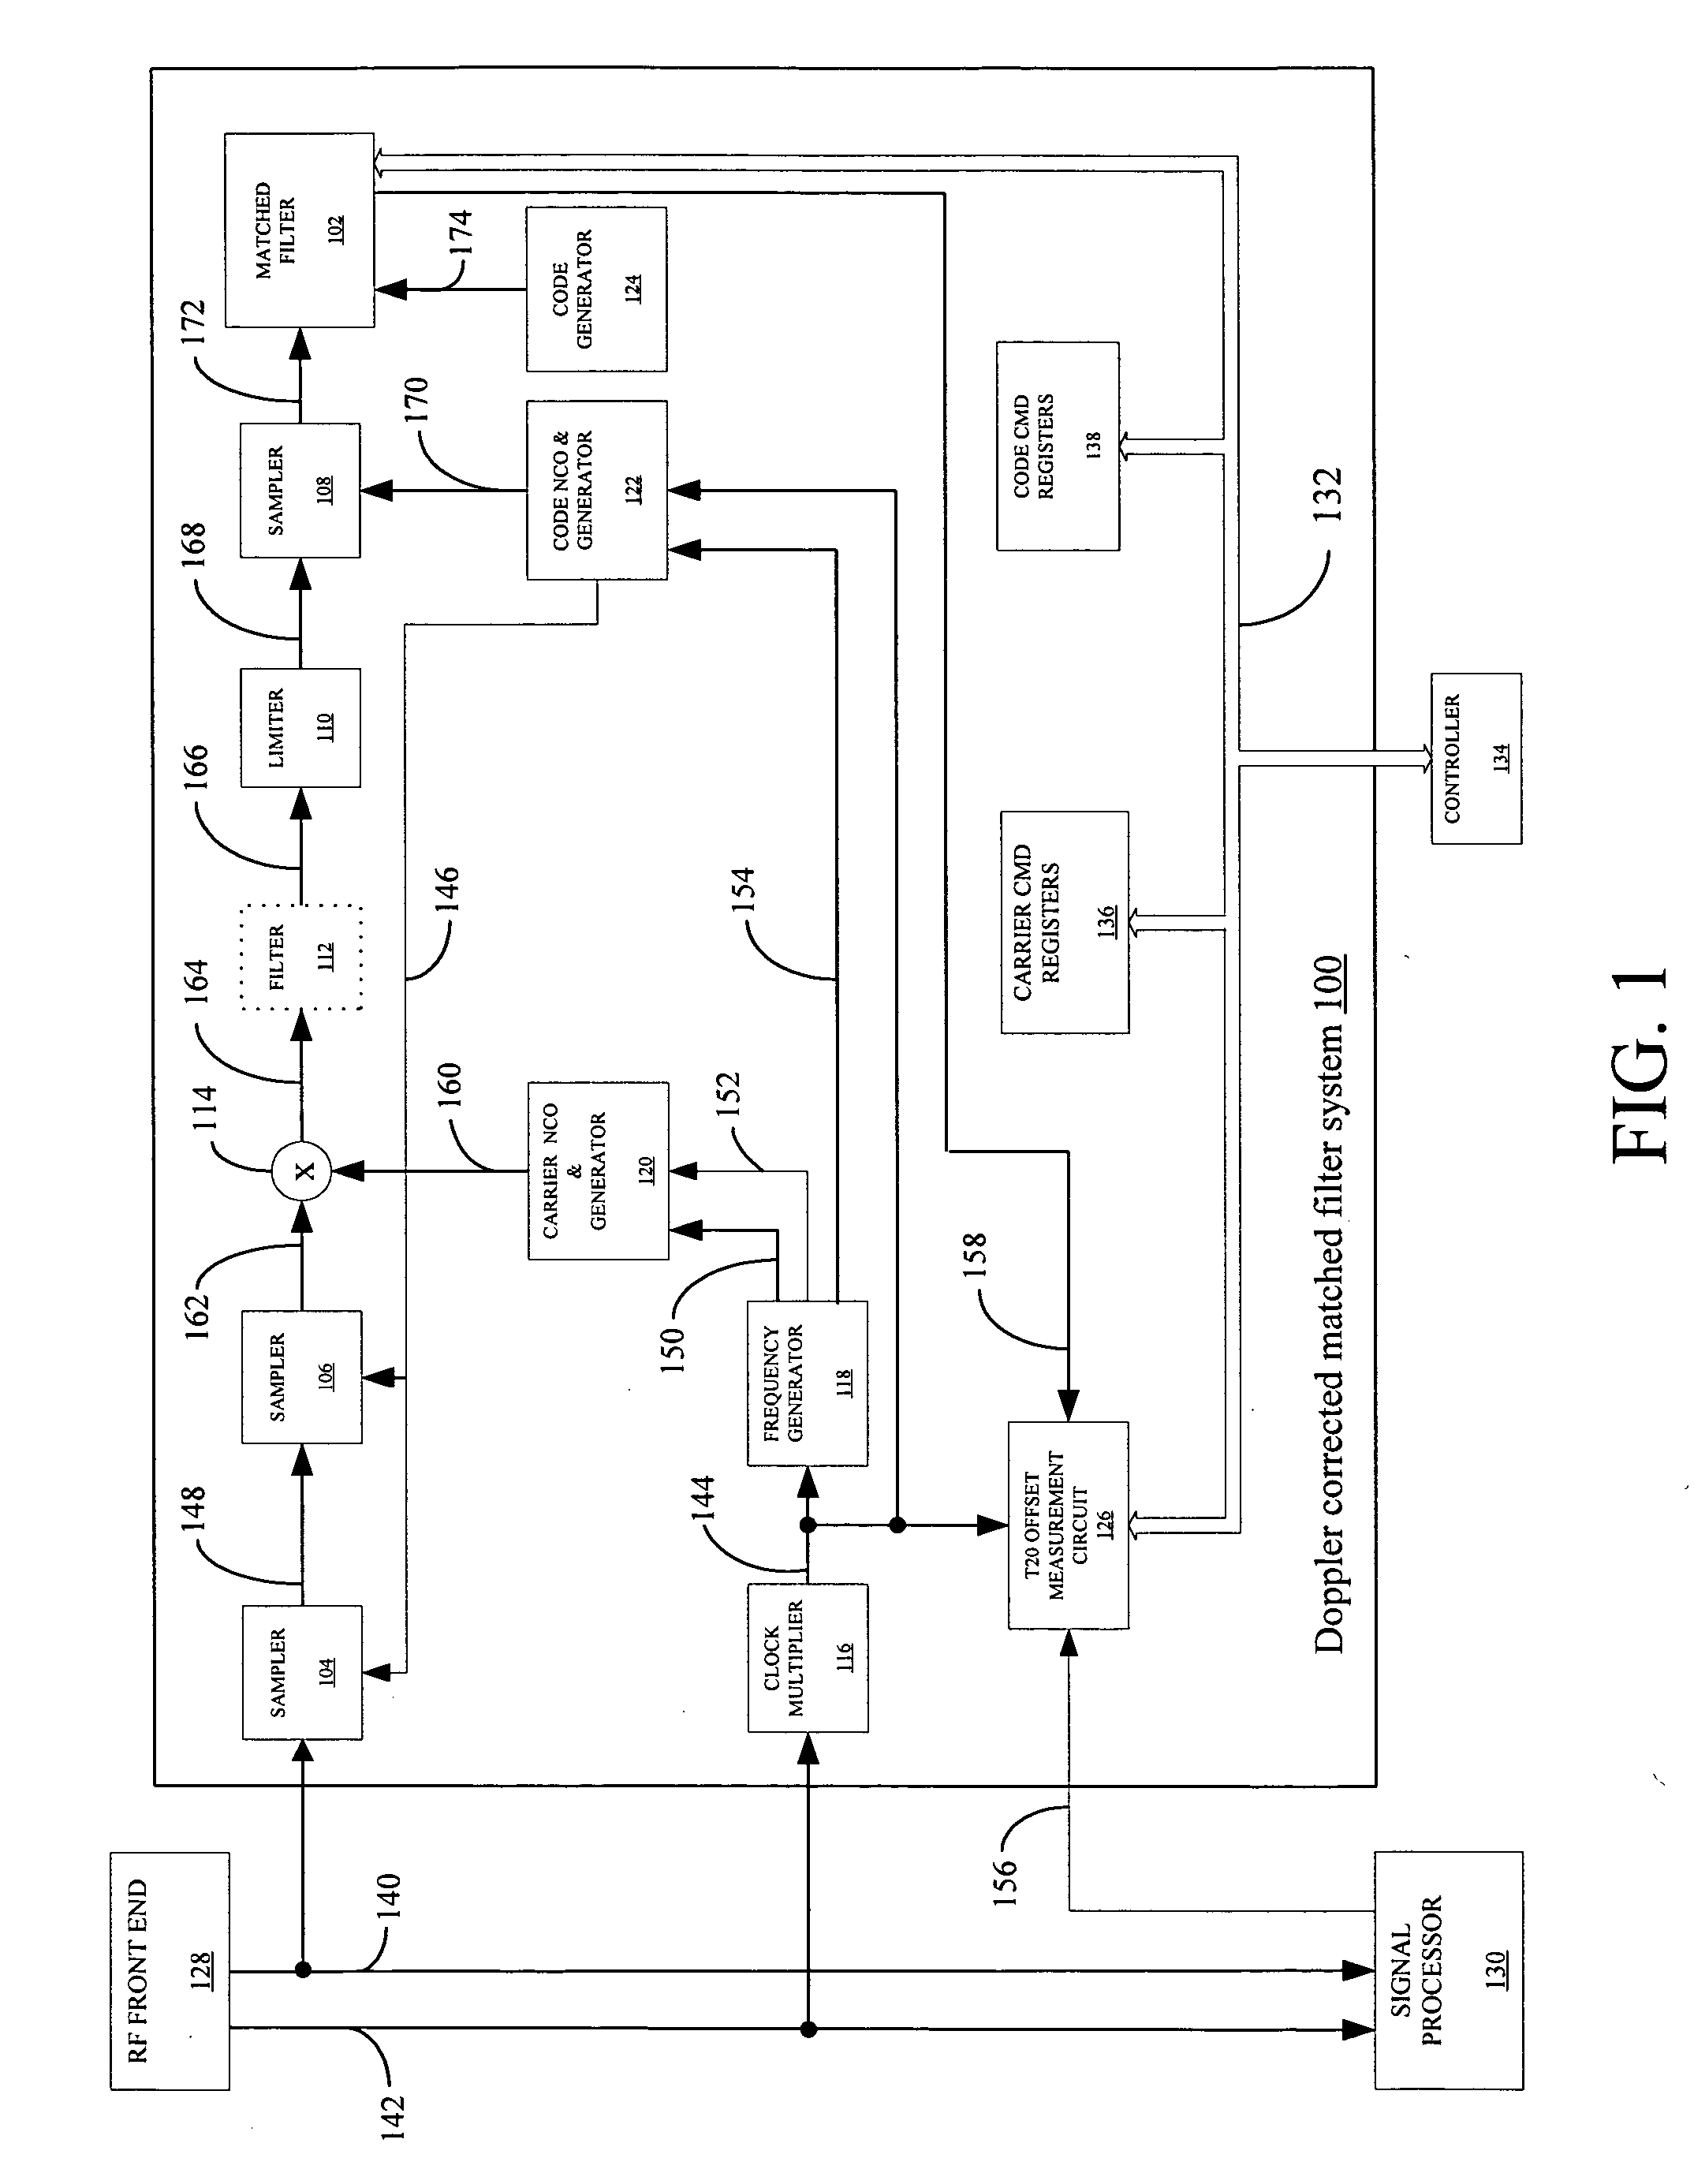 System and method for despreading in a spread spectrum matched filter